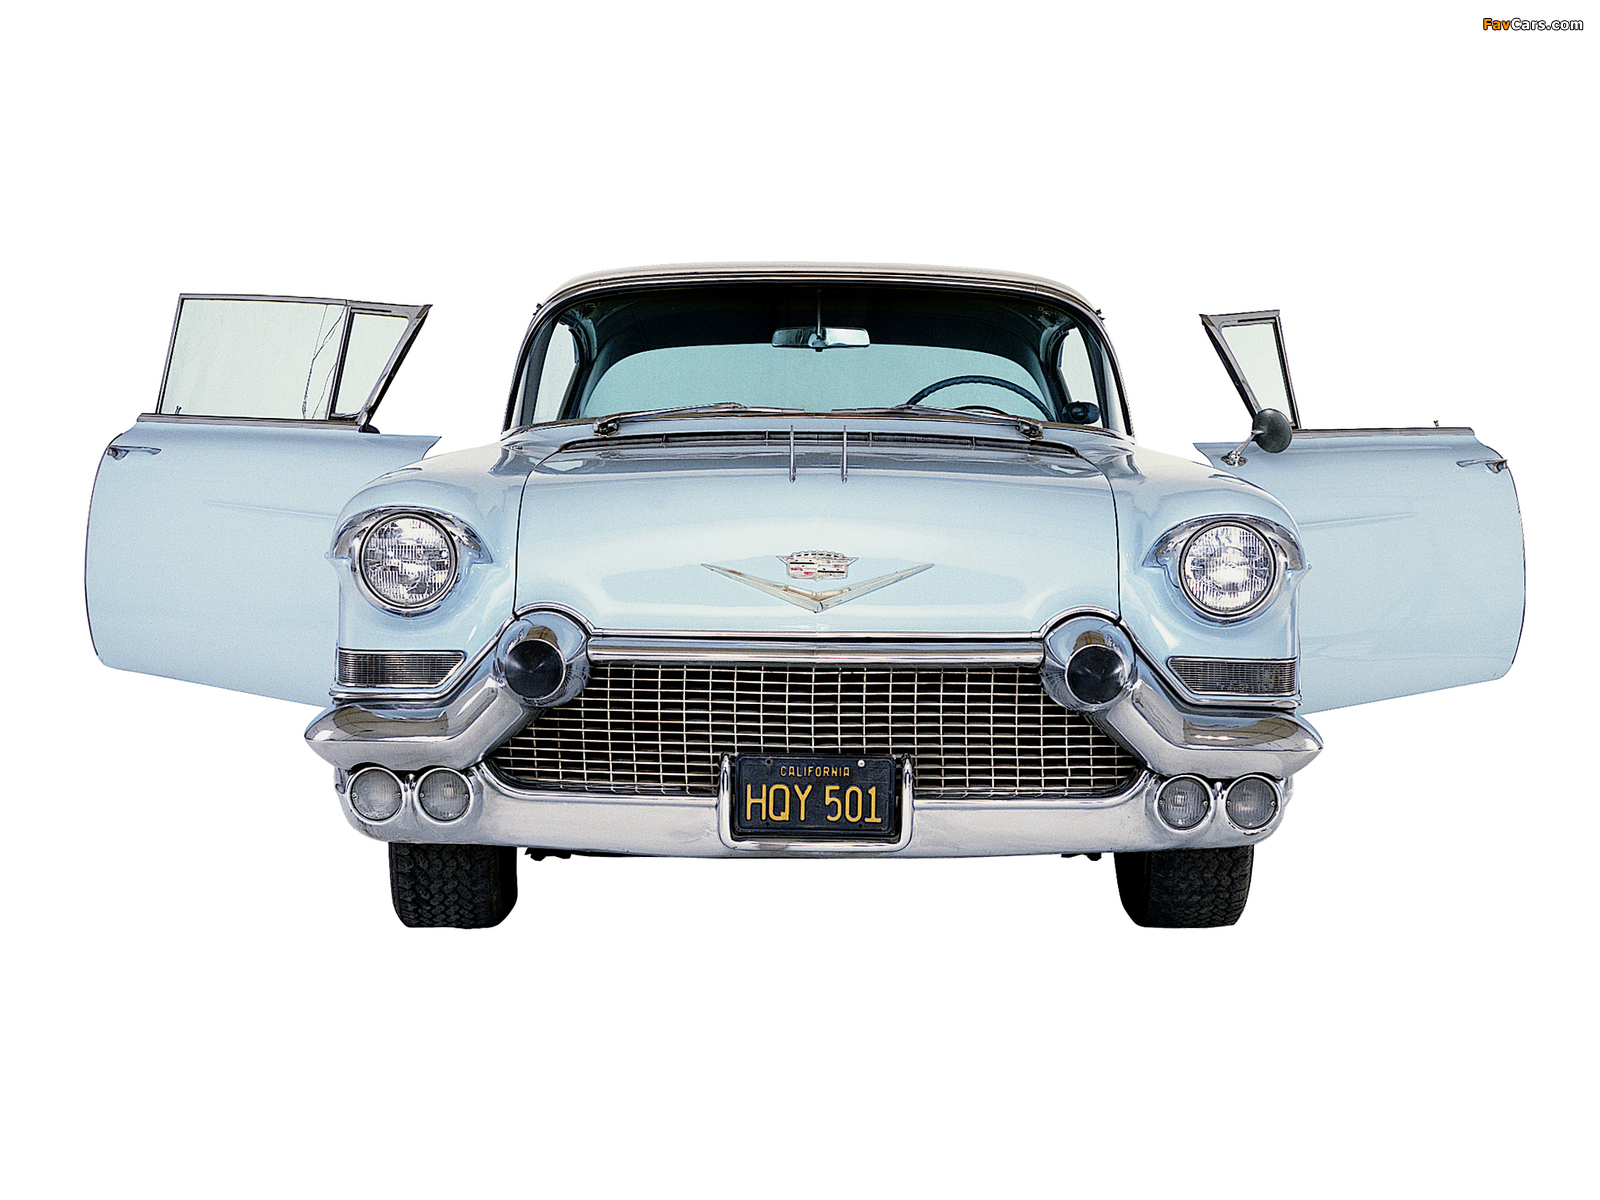 Pictures of Cadillac Sixty-Two 2-door Hardtop 1957 (1600 x 1200)